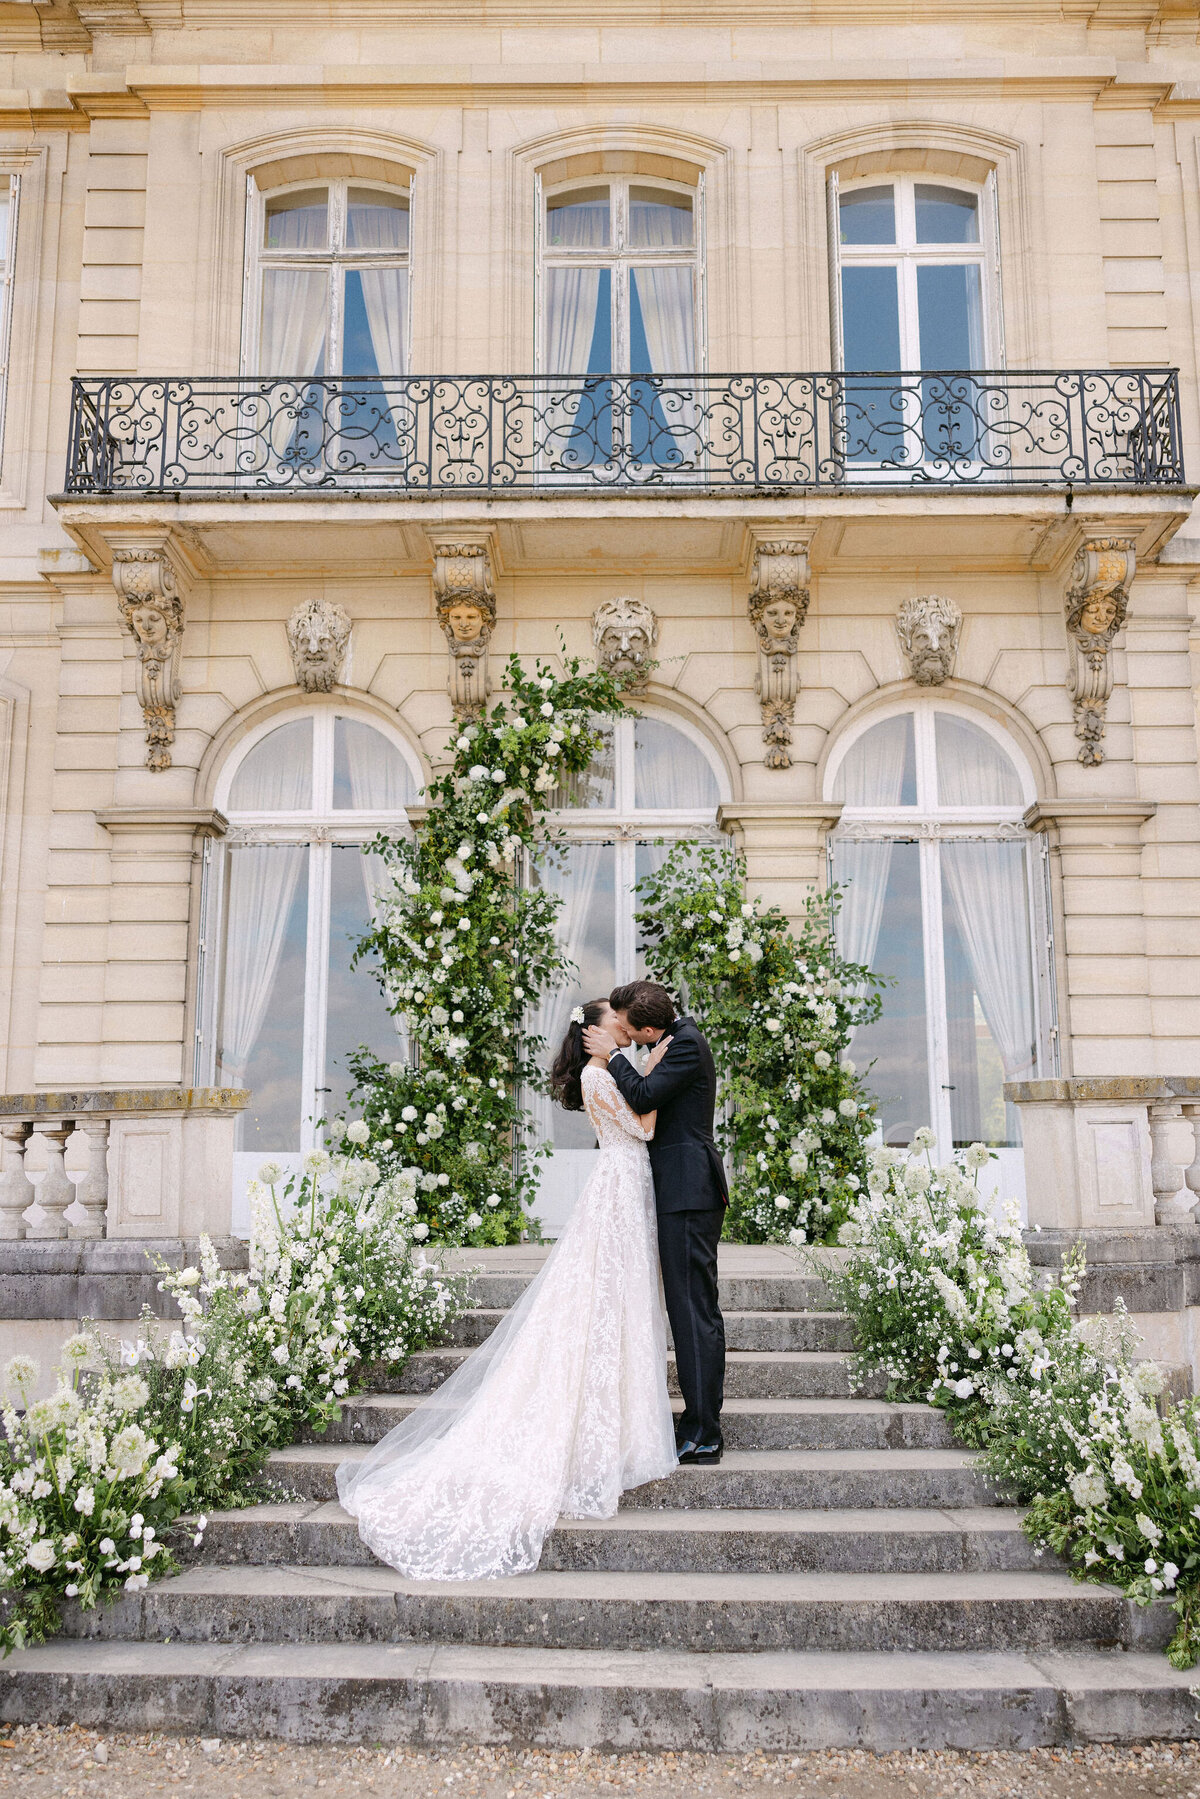 Jennifer Fox Weddings English speaking wedding planning & design agency in France crafting refined and bespoke weddings and celebrations Provence, Paris and destination 351